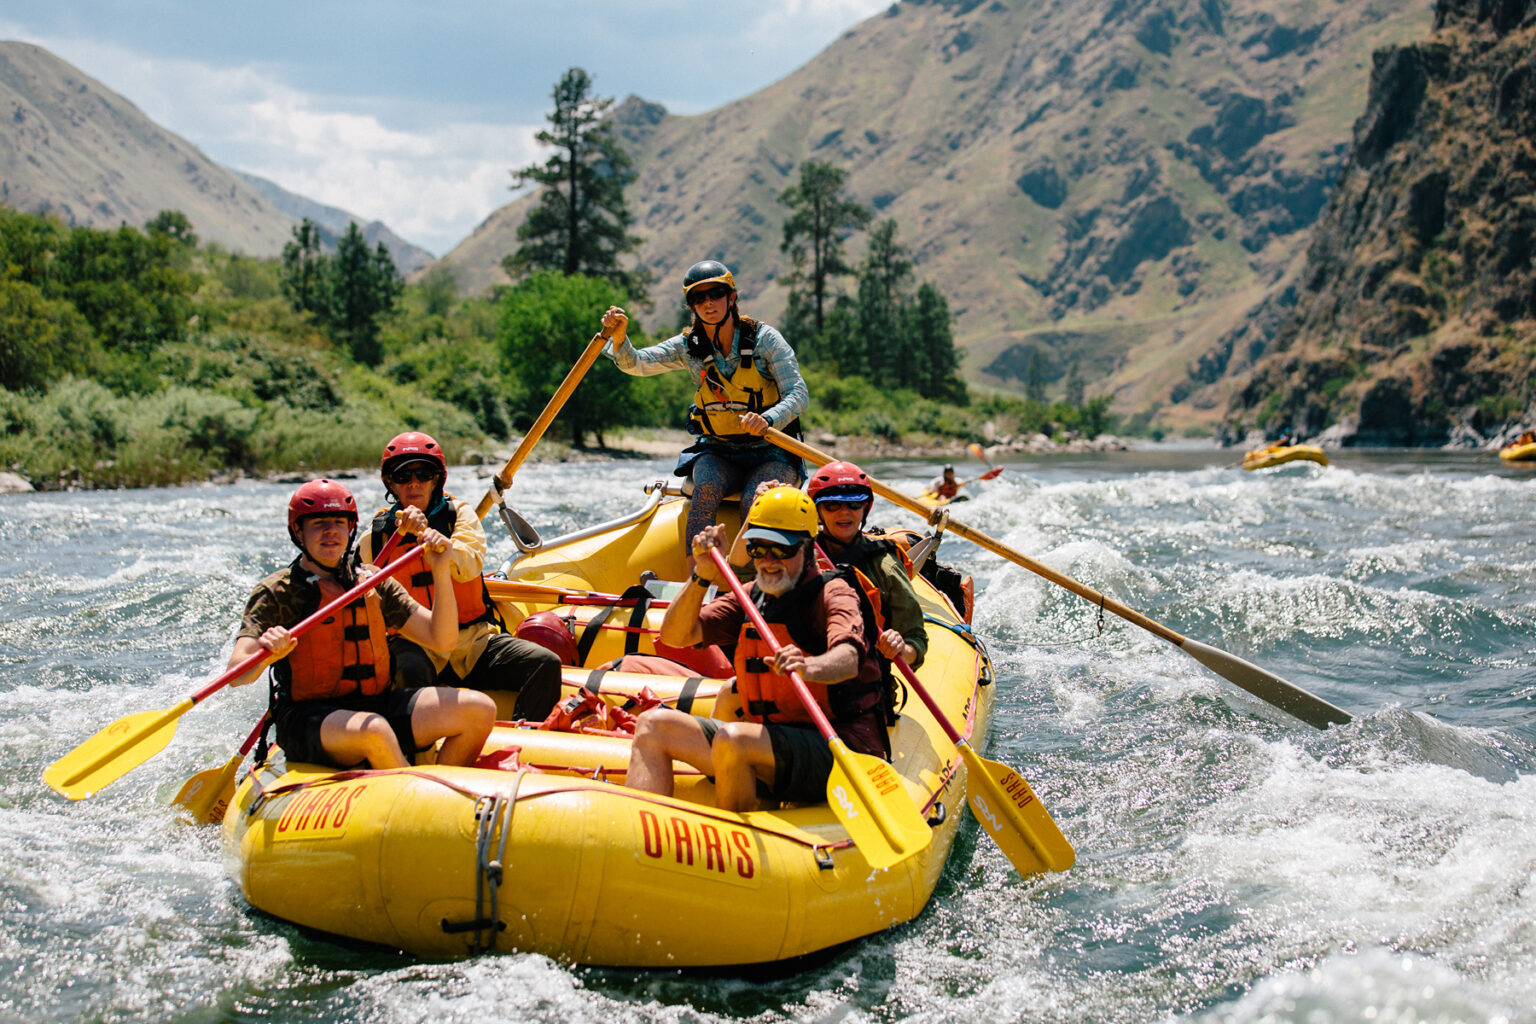 A group of people paddle through a rapid in a yellow raft on an OARS Snake River through Hells Canyon trip in Idaho.